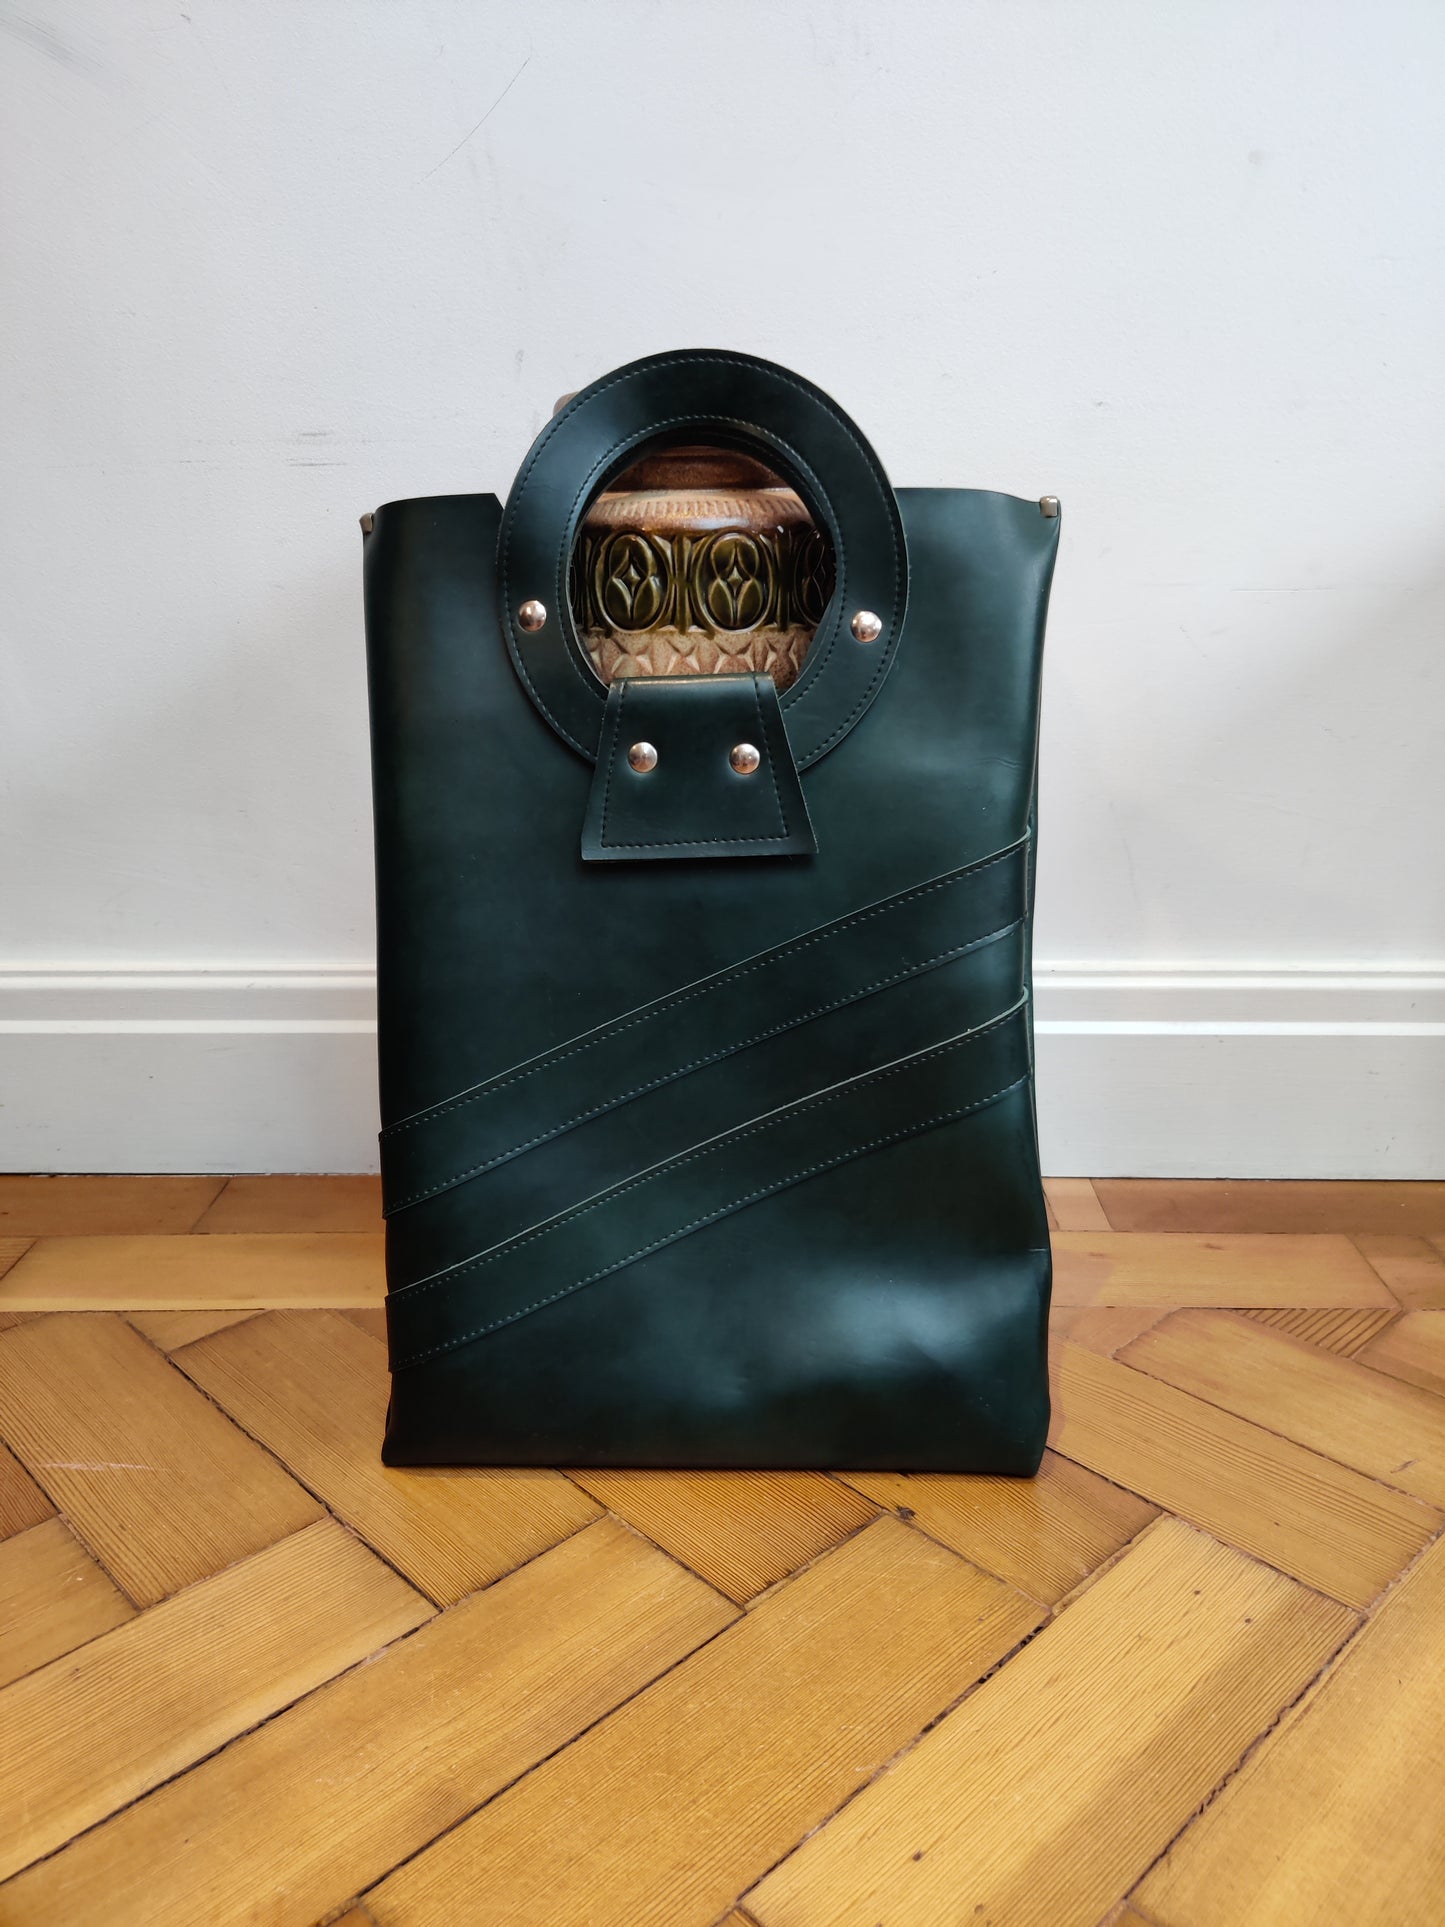 60s shopping bag in very dark green with silver studs